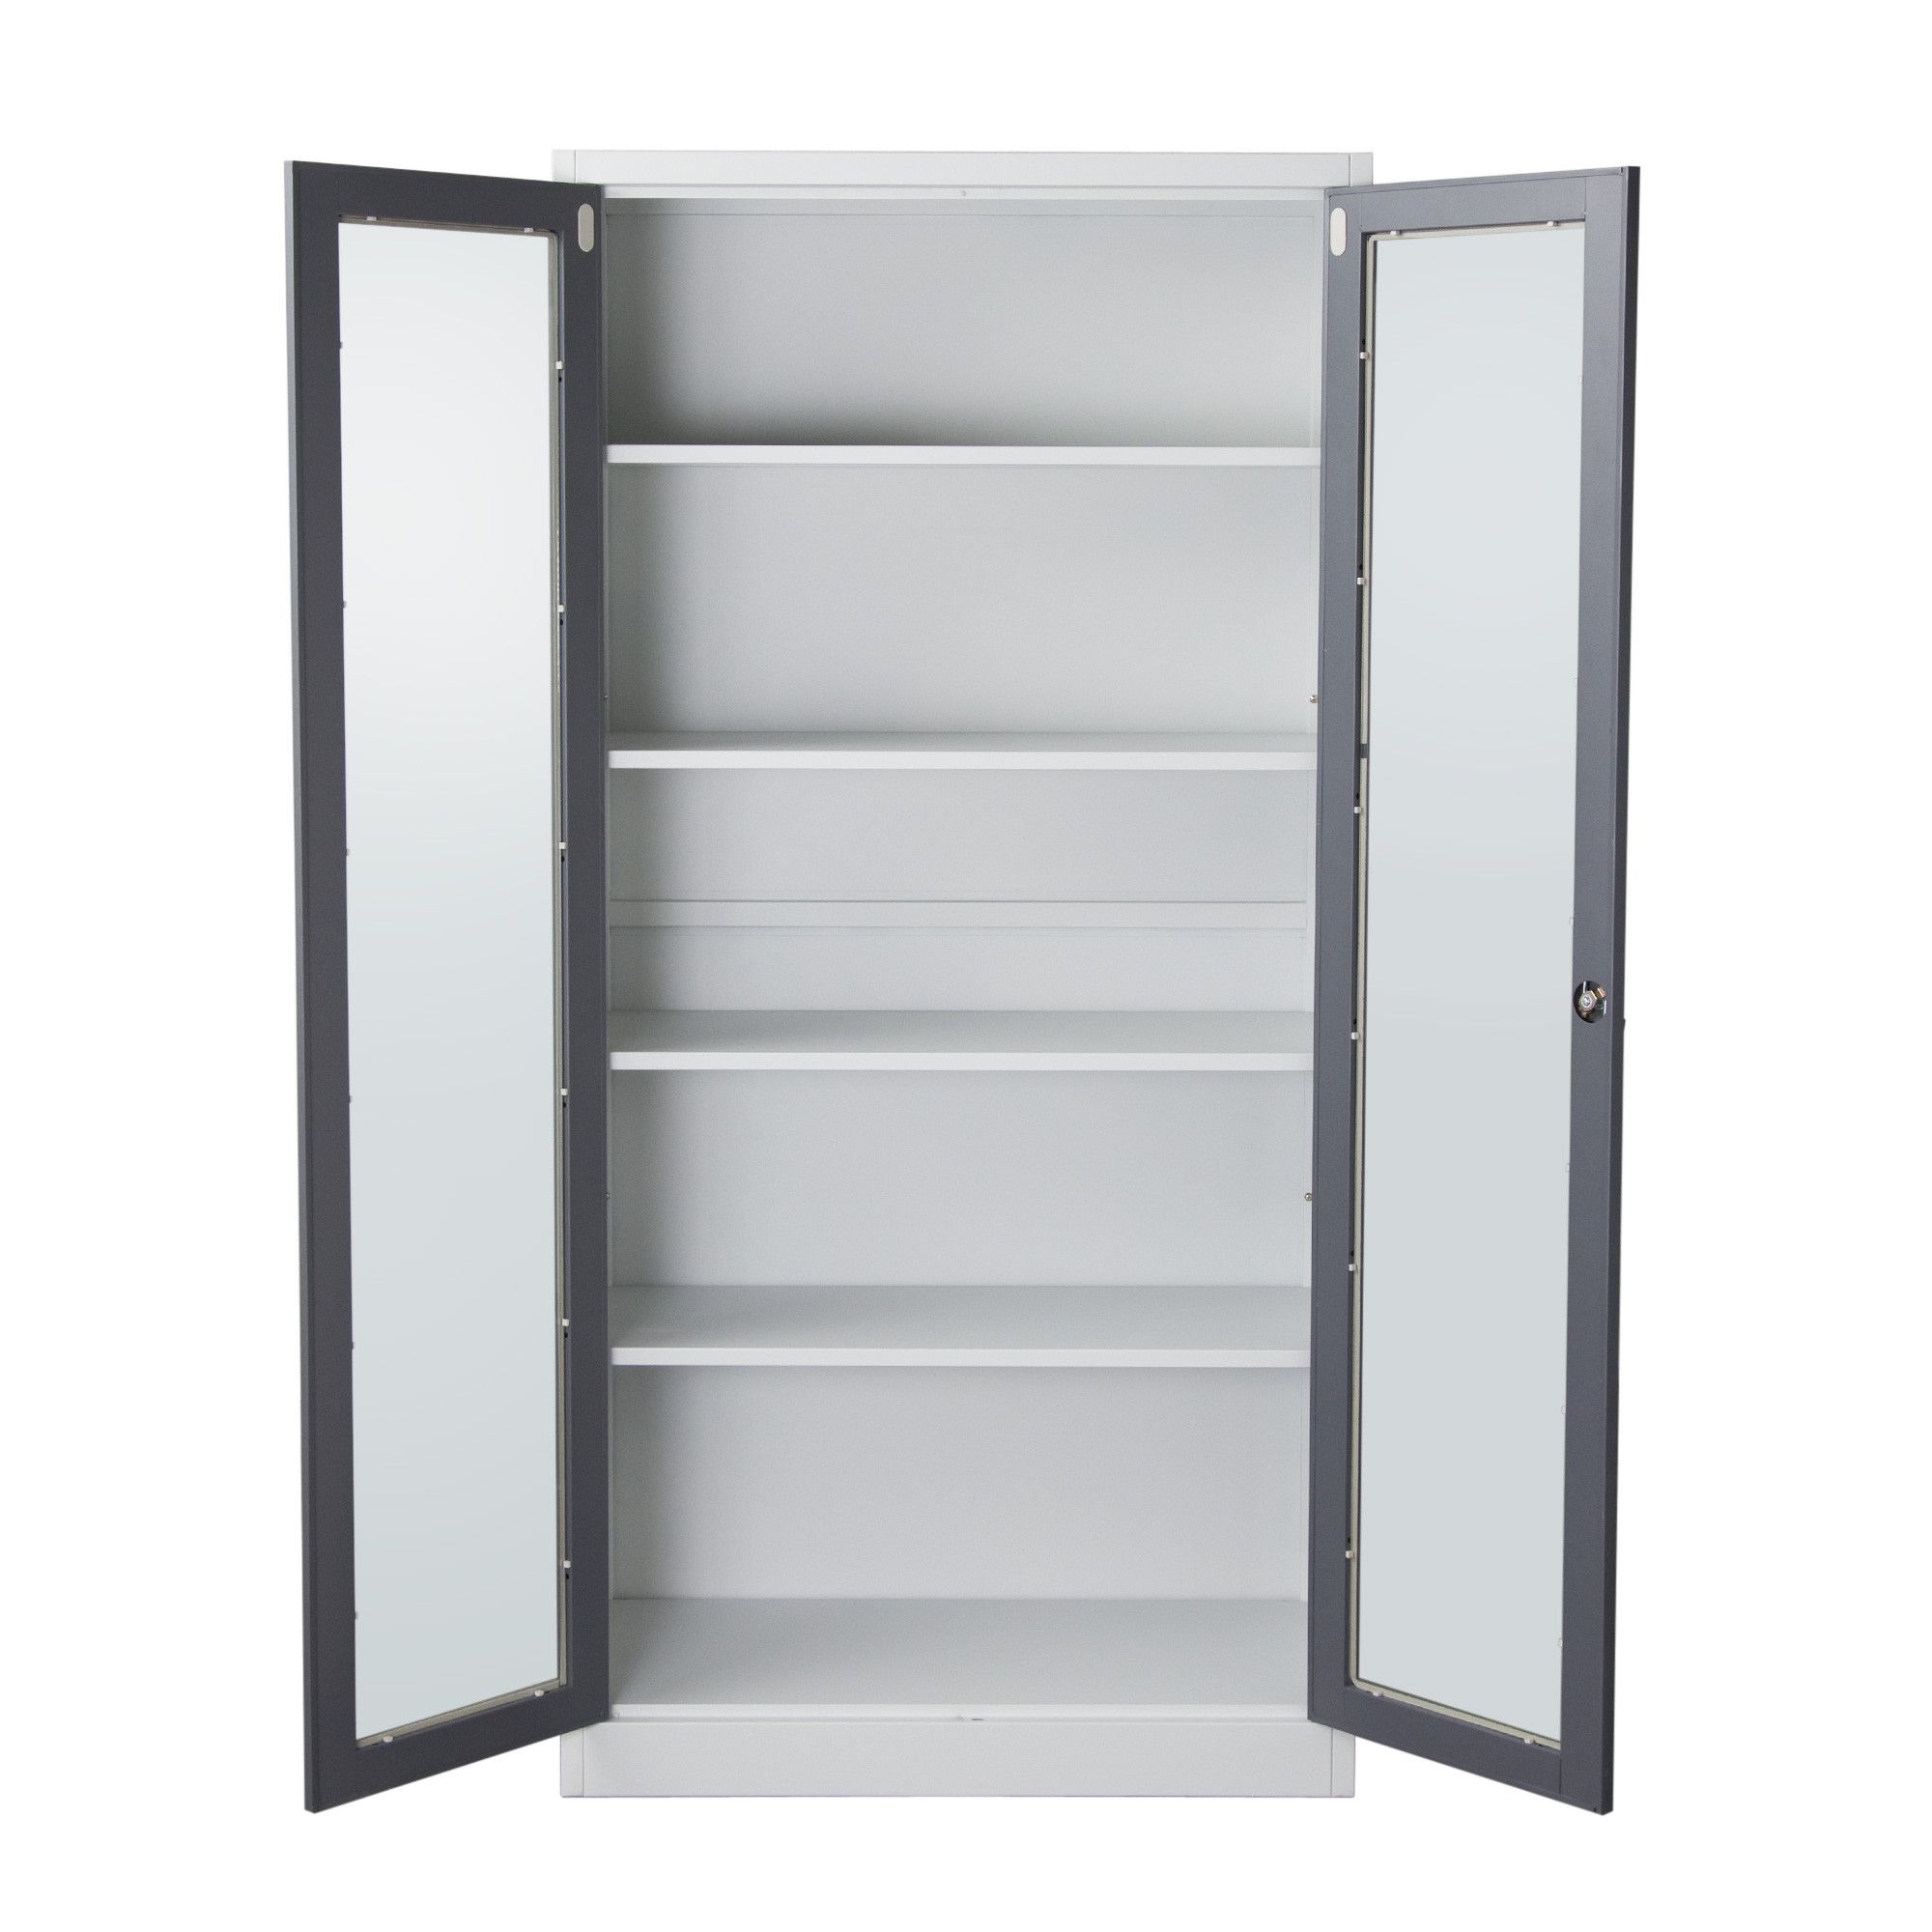 2 Door Bookcase With 5 Shelves In Dark Greyoff White Diamond Within Off White Bookcase (View 5 of 15)